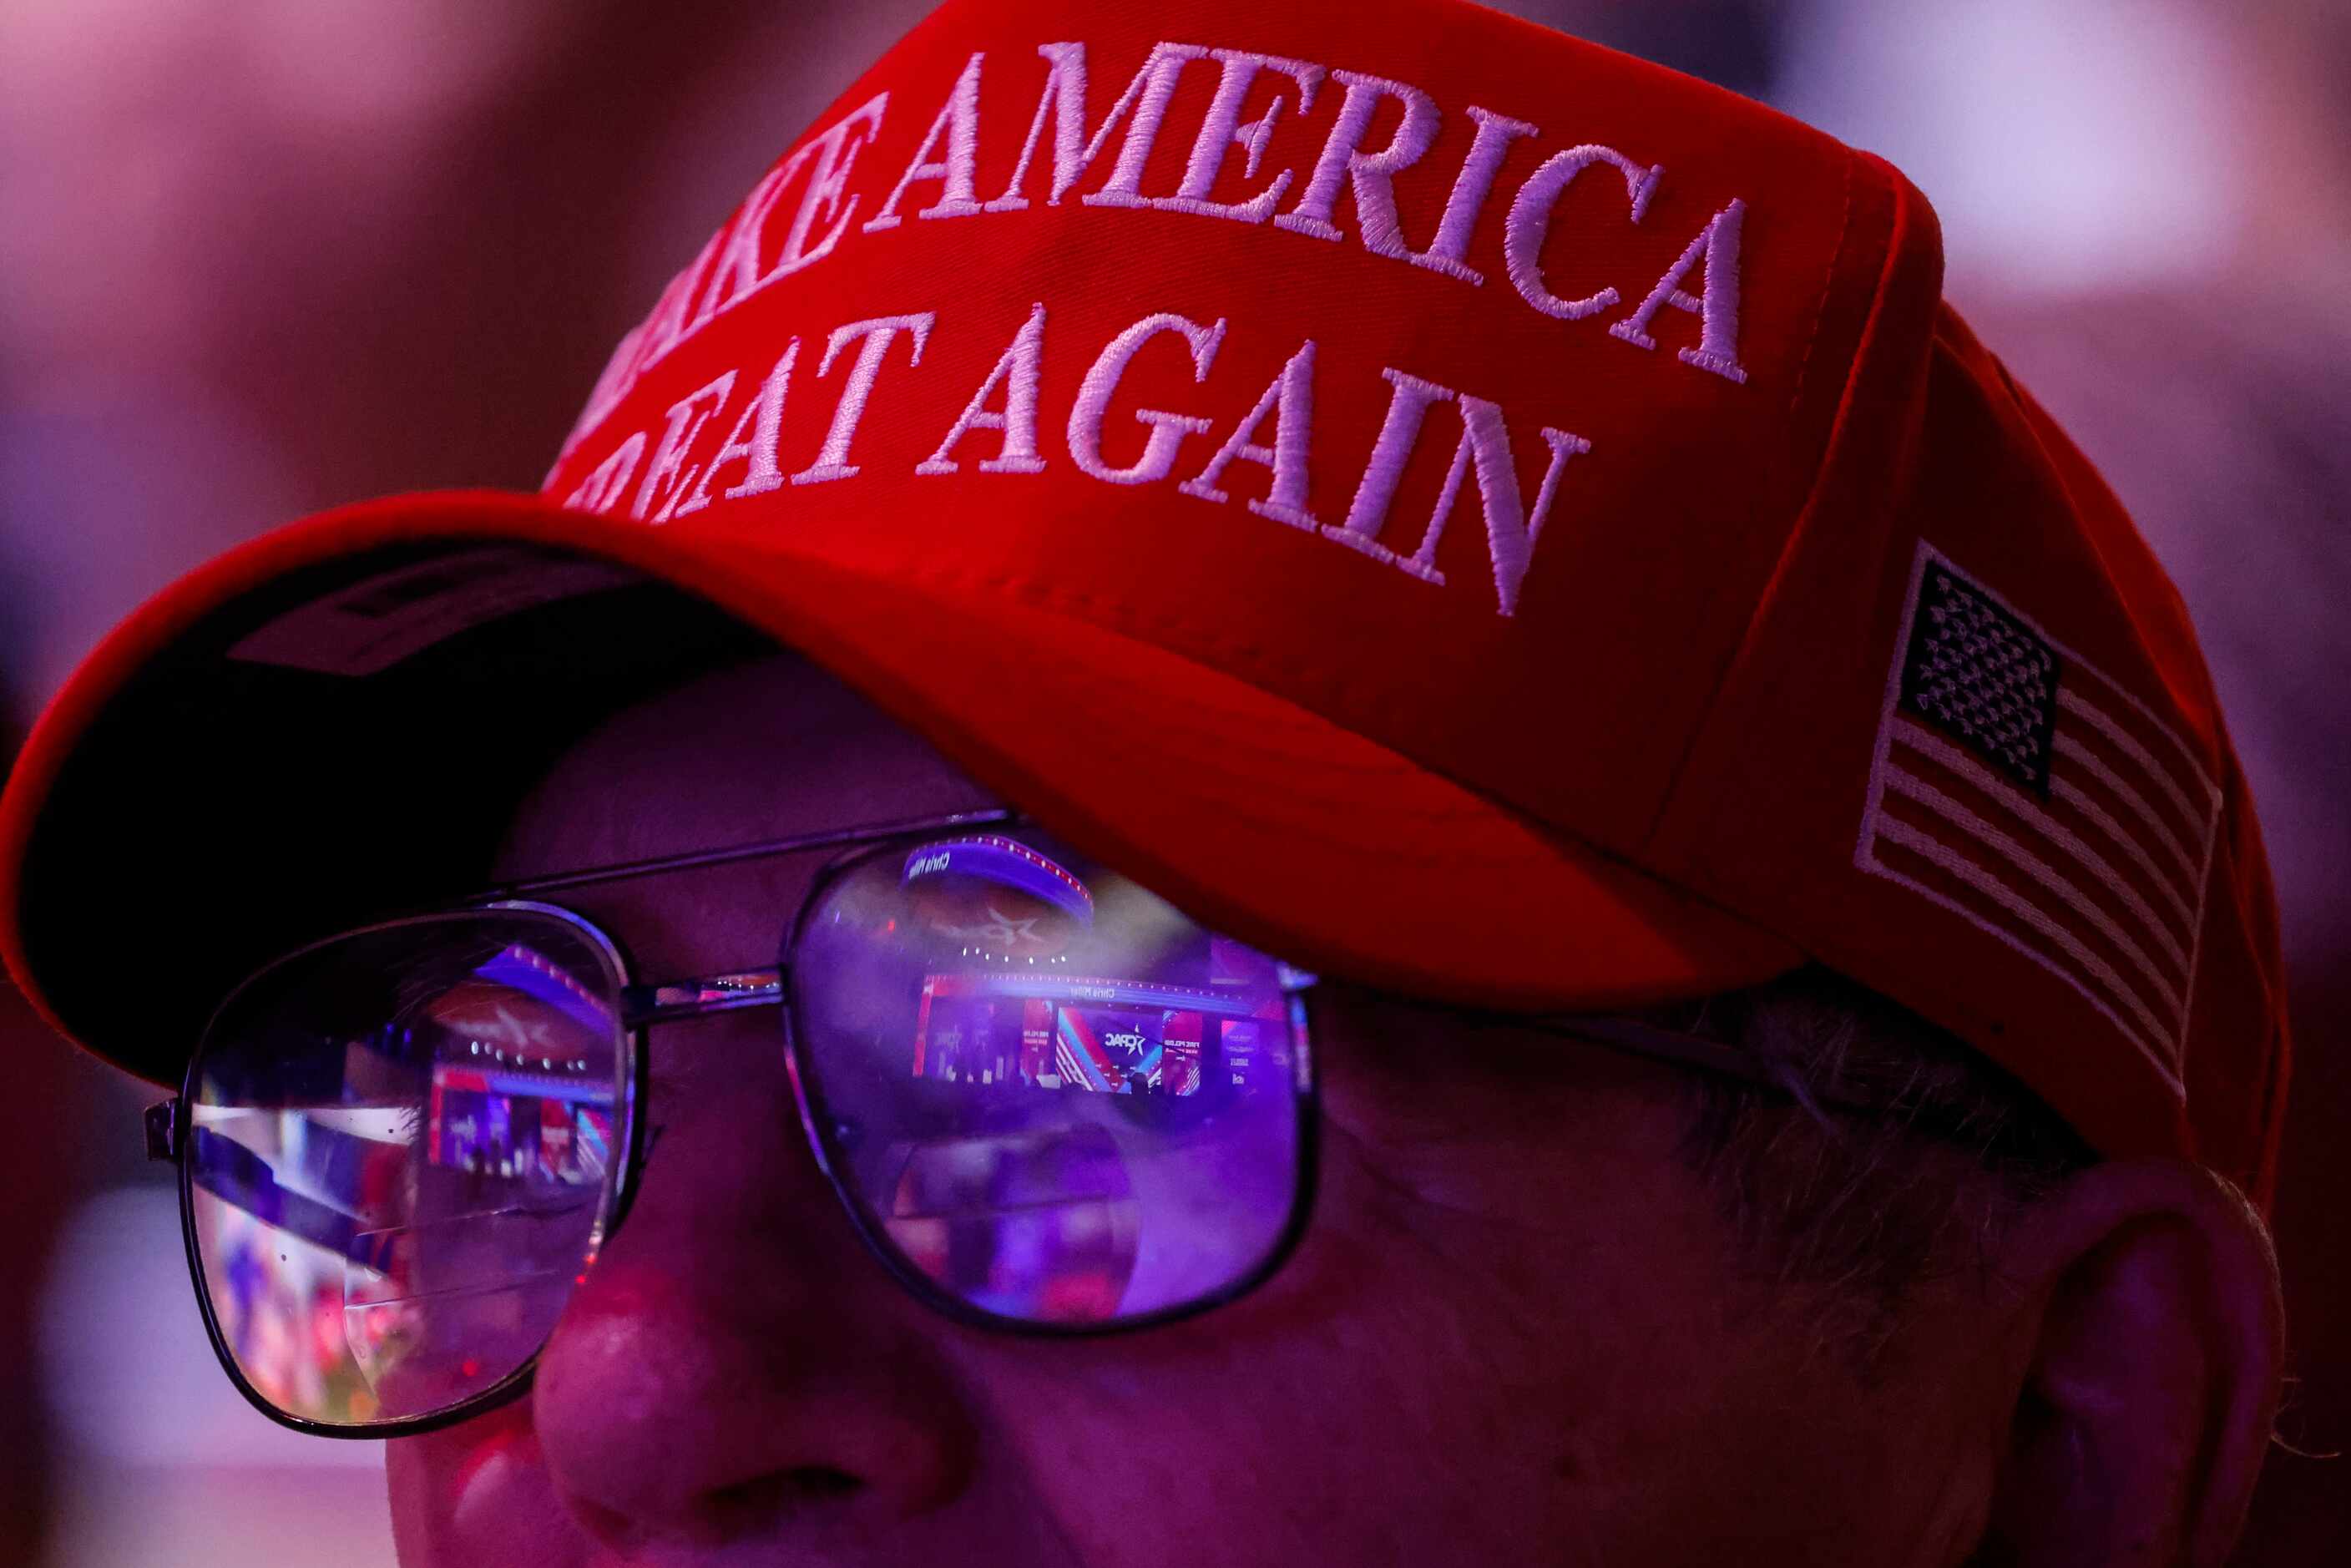 The main stage of CPAC is reflected on the spectacles of an attendee during the third day of...